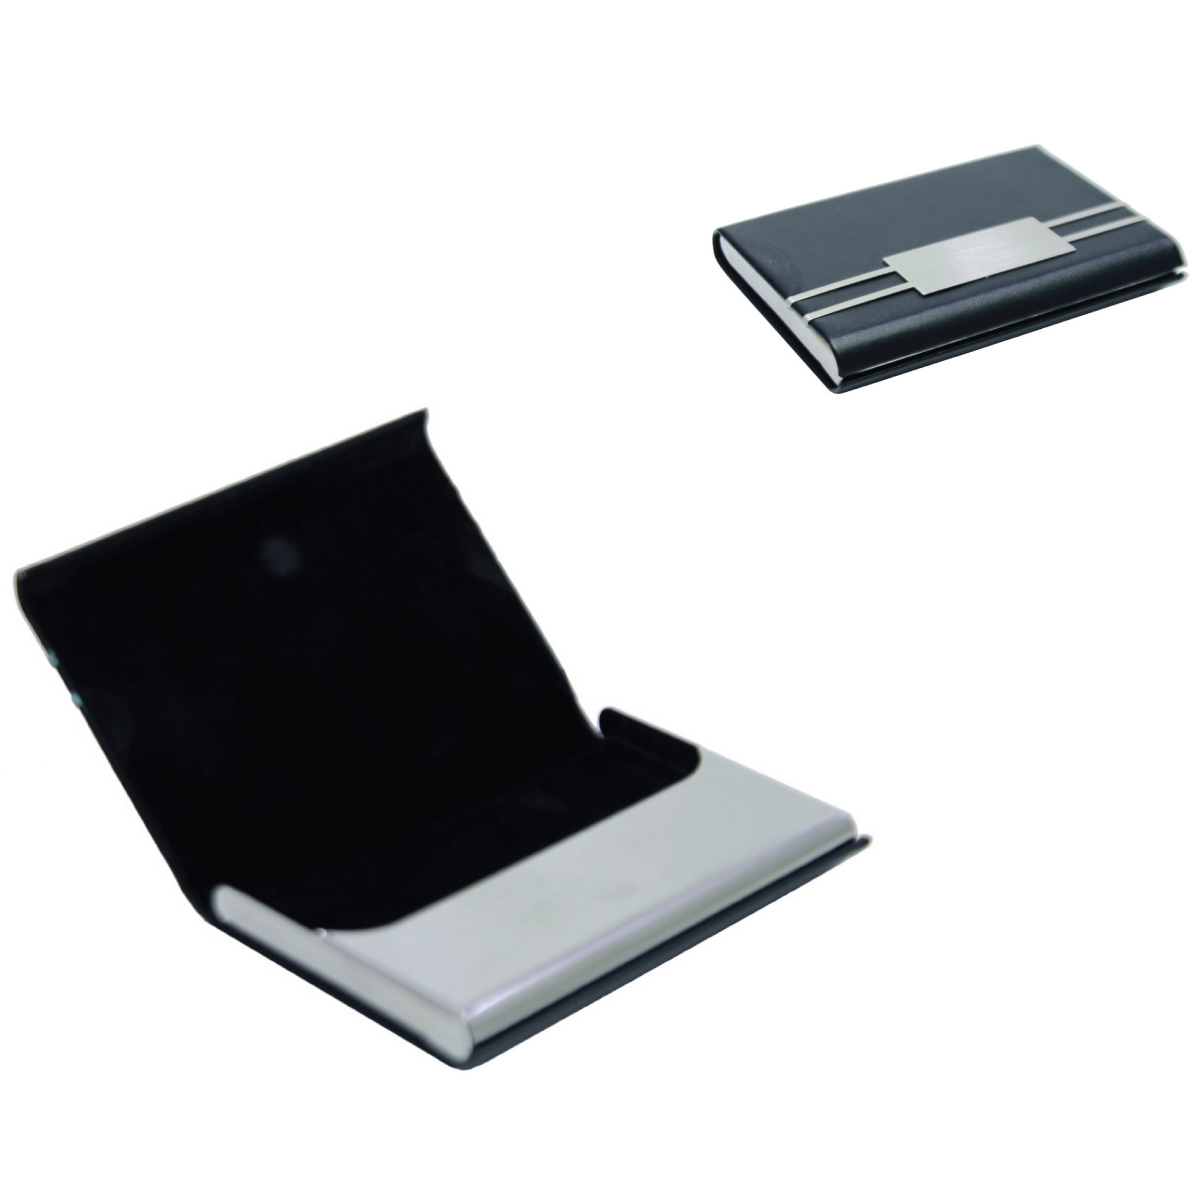 Black Magnetic Business Visiting Card Holder - For Corporate Gifting, Event Gifting, Freebies, Promotions JA (118) MCH18